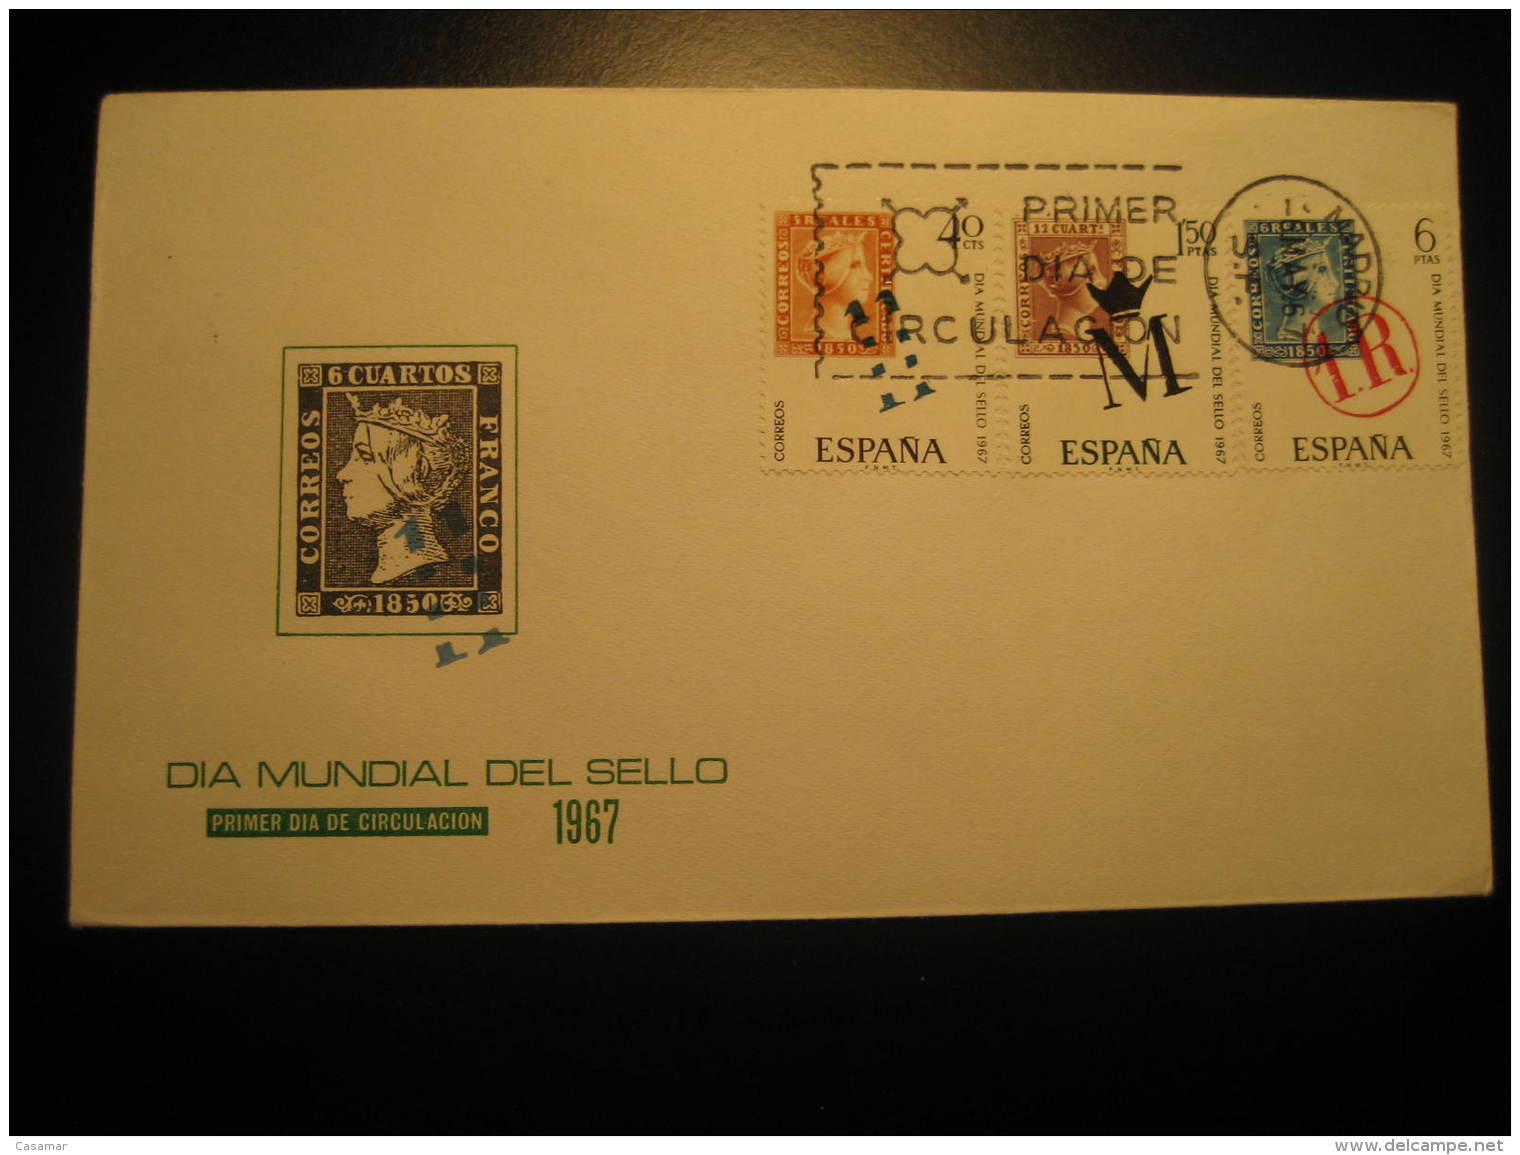 Madrid 1967 World Stamp Day Stamp On Stamp Stamps On Stamps Fdc Cancel Cover Spain - Stamps On Stamps